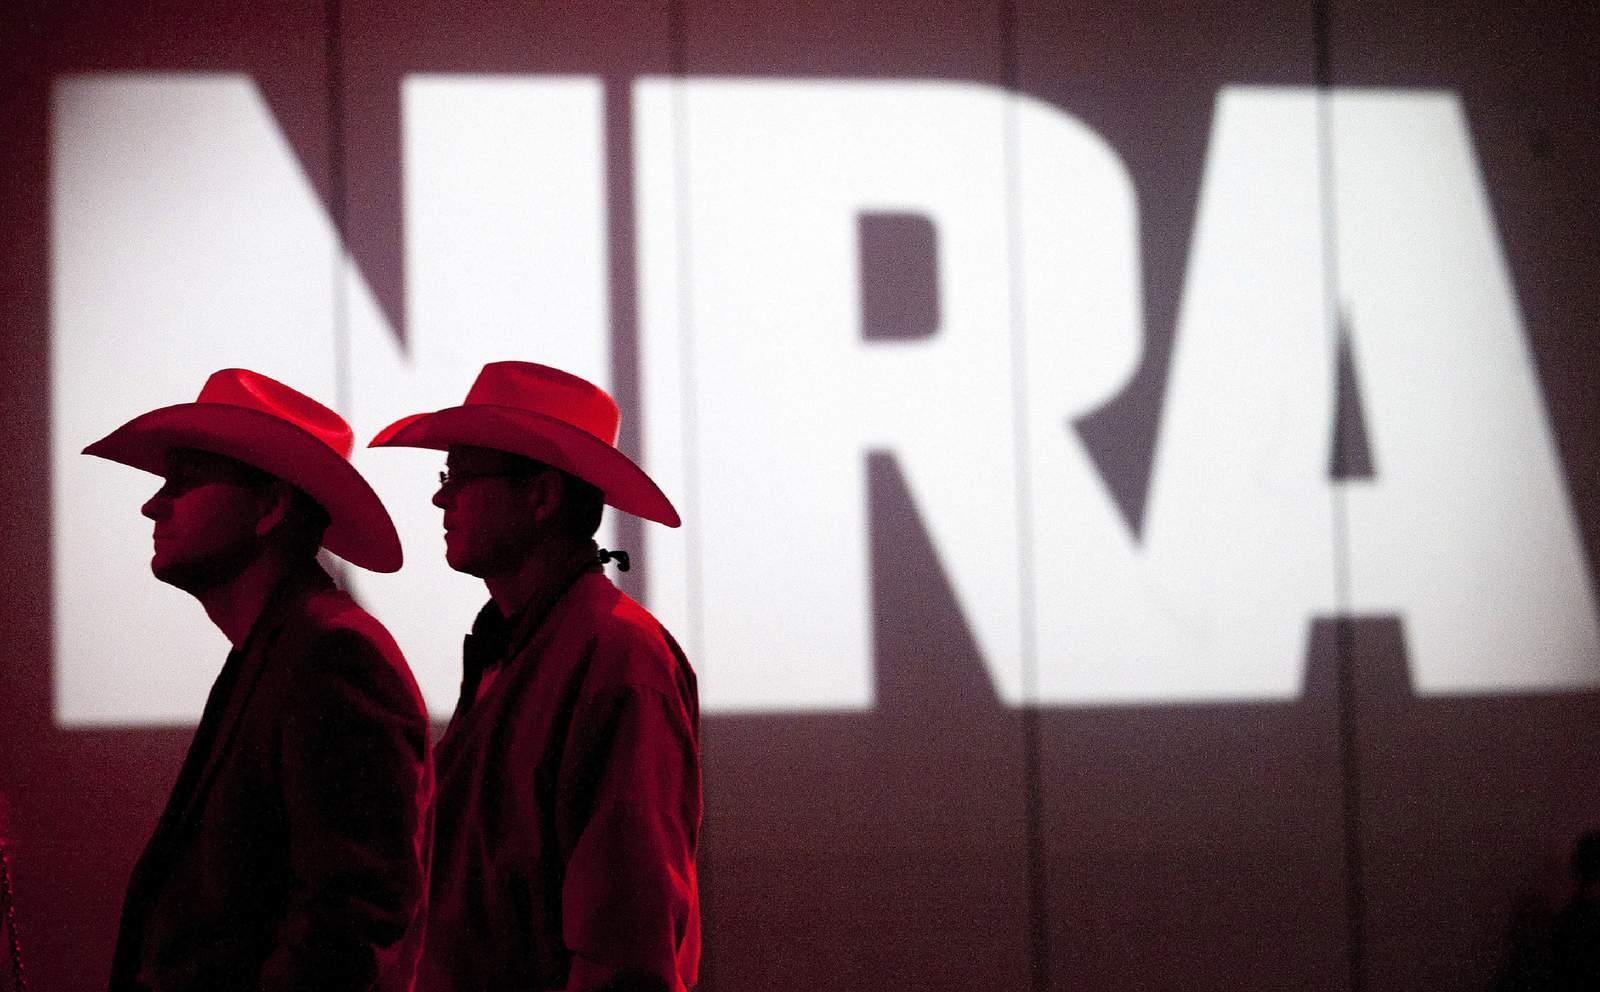 NRA declares bankruptcy, announces plans to incorporate in Texas